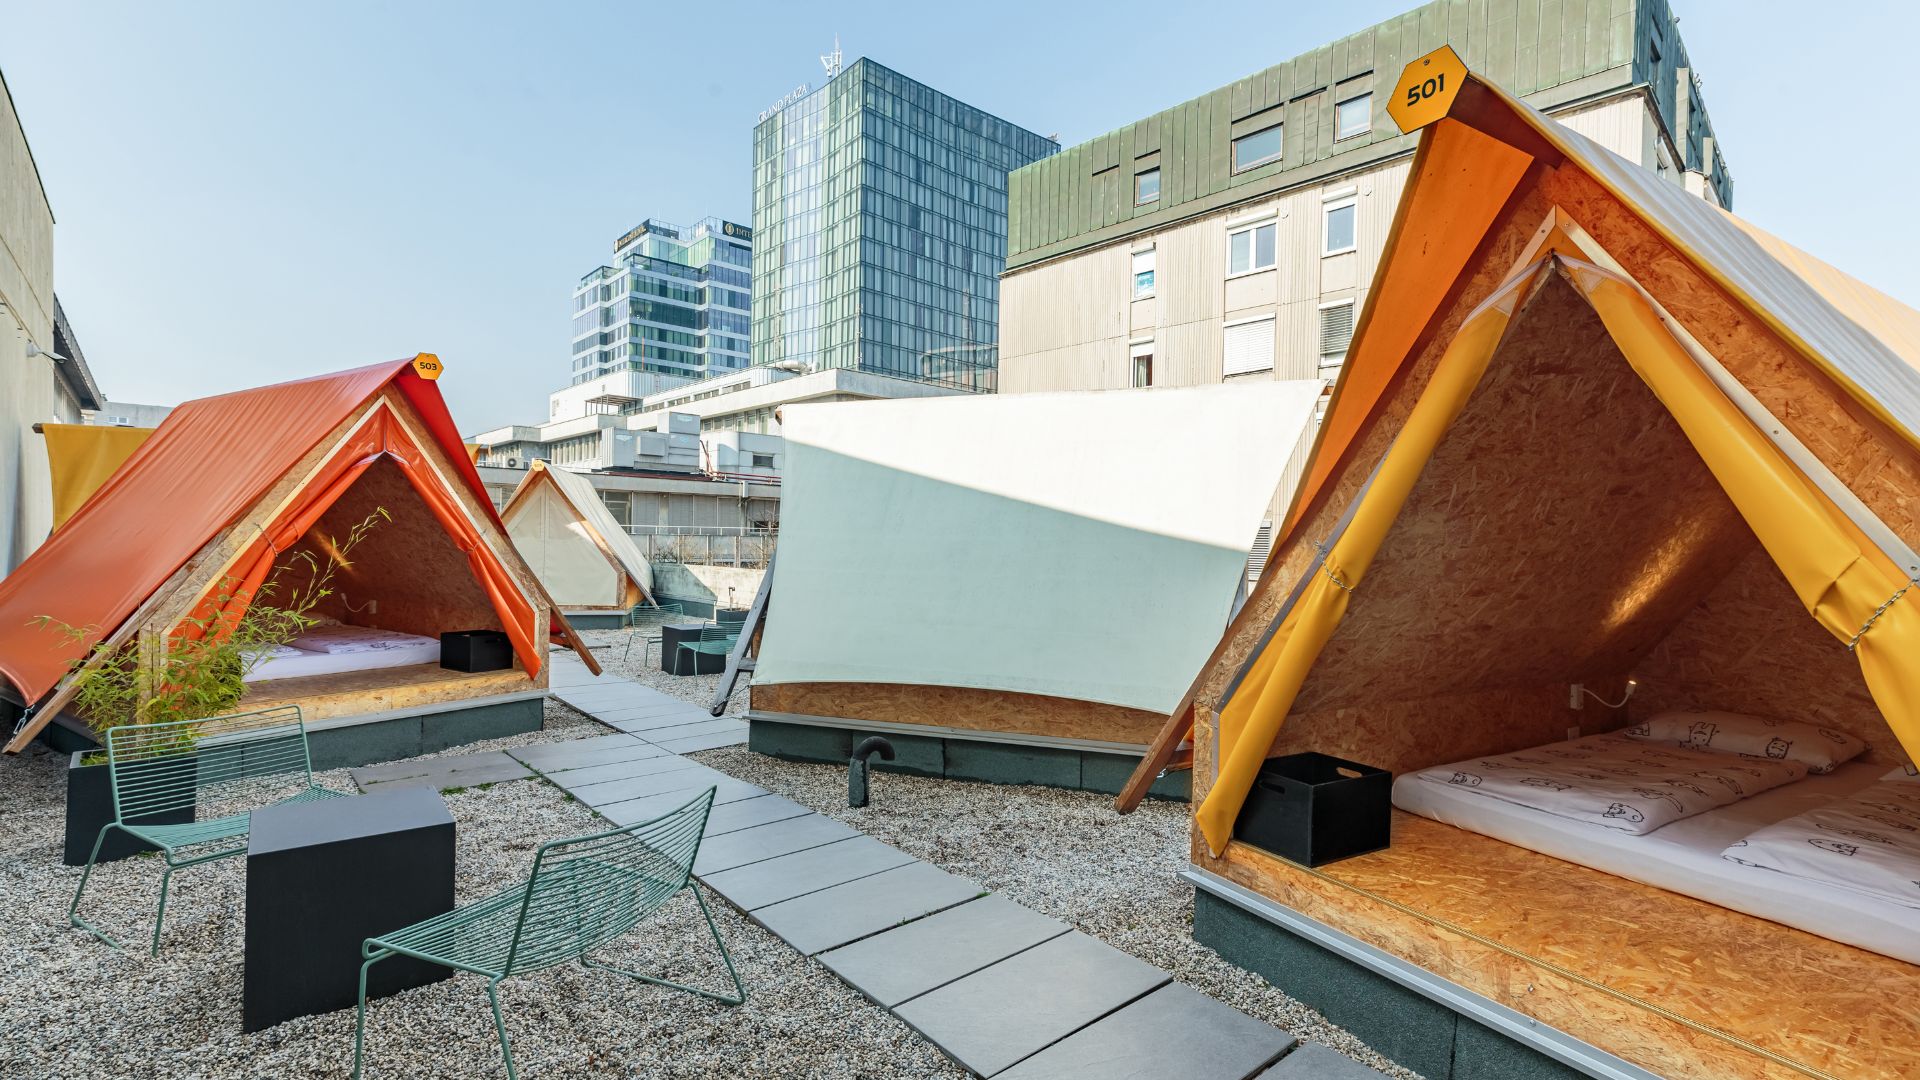 The Fuzzy Log Hostel Rooftop Tents